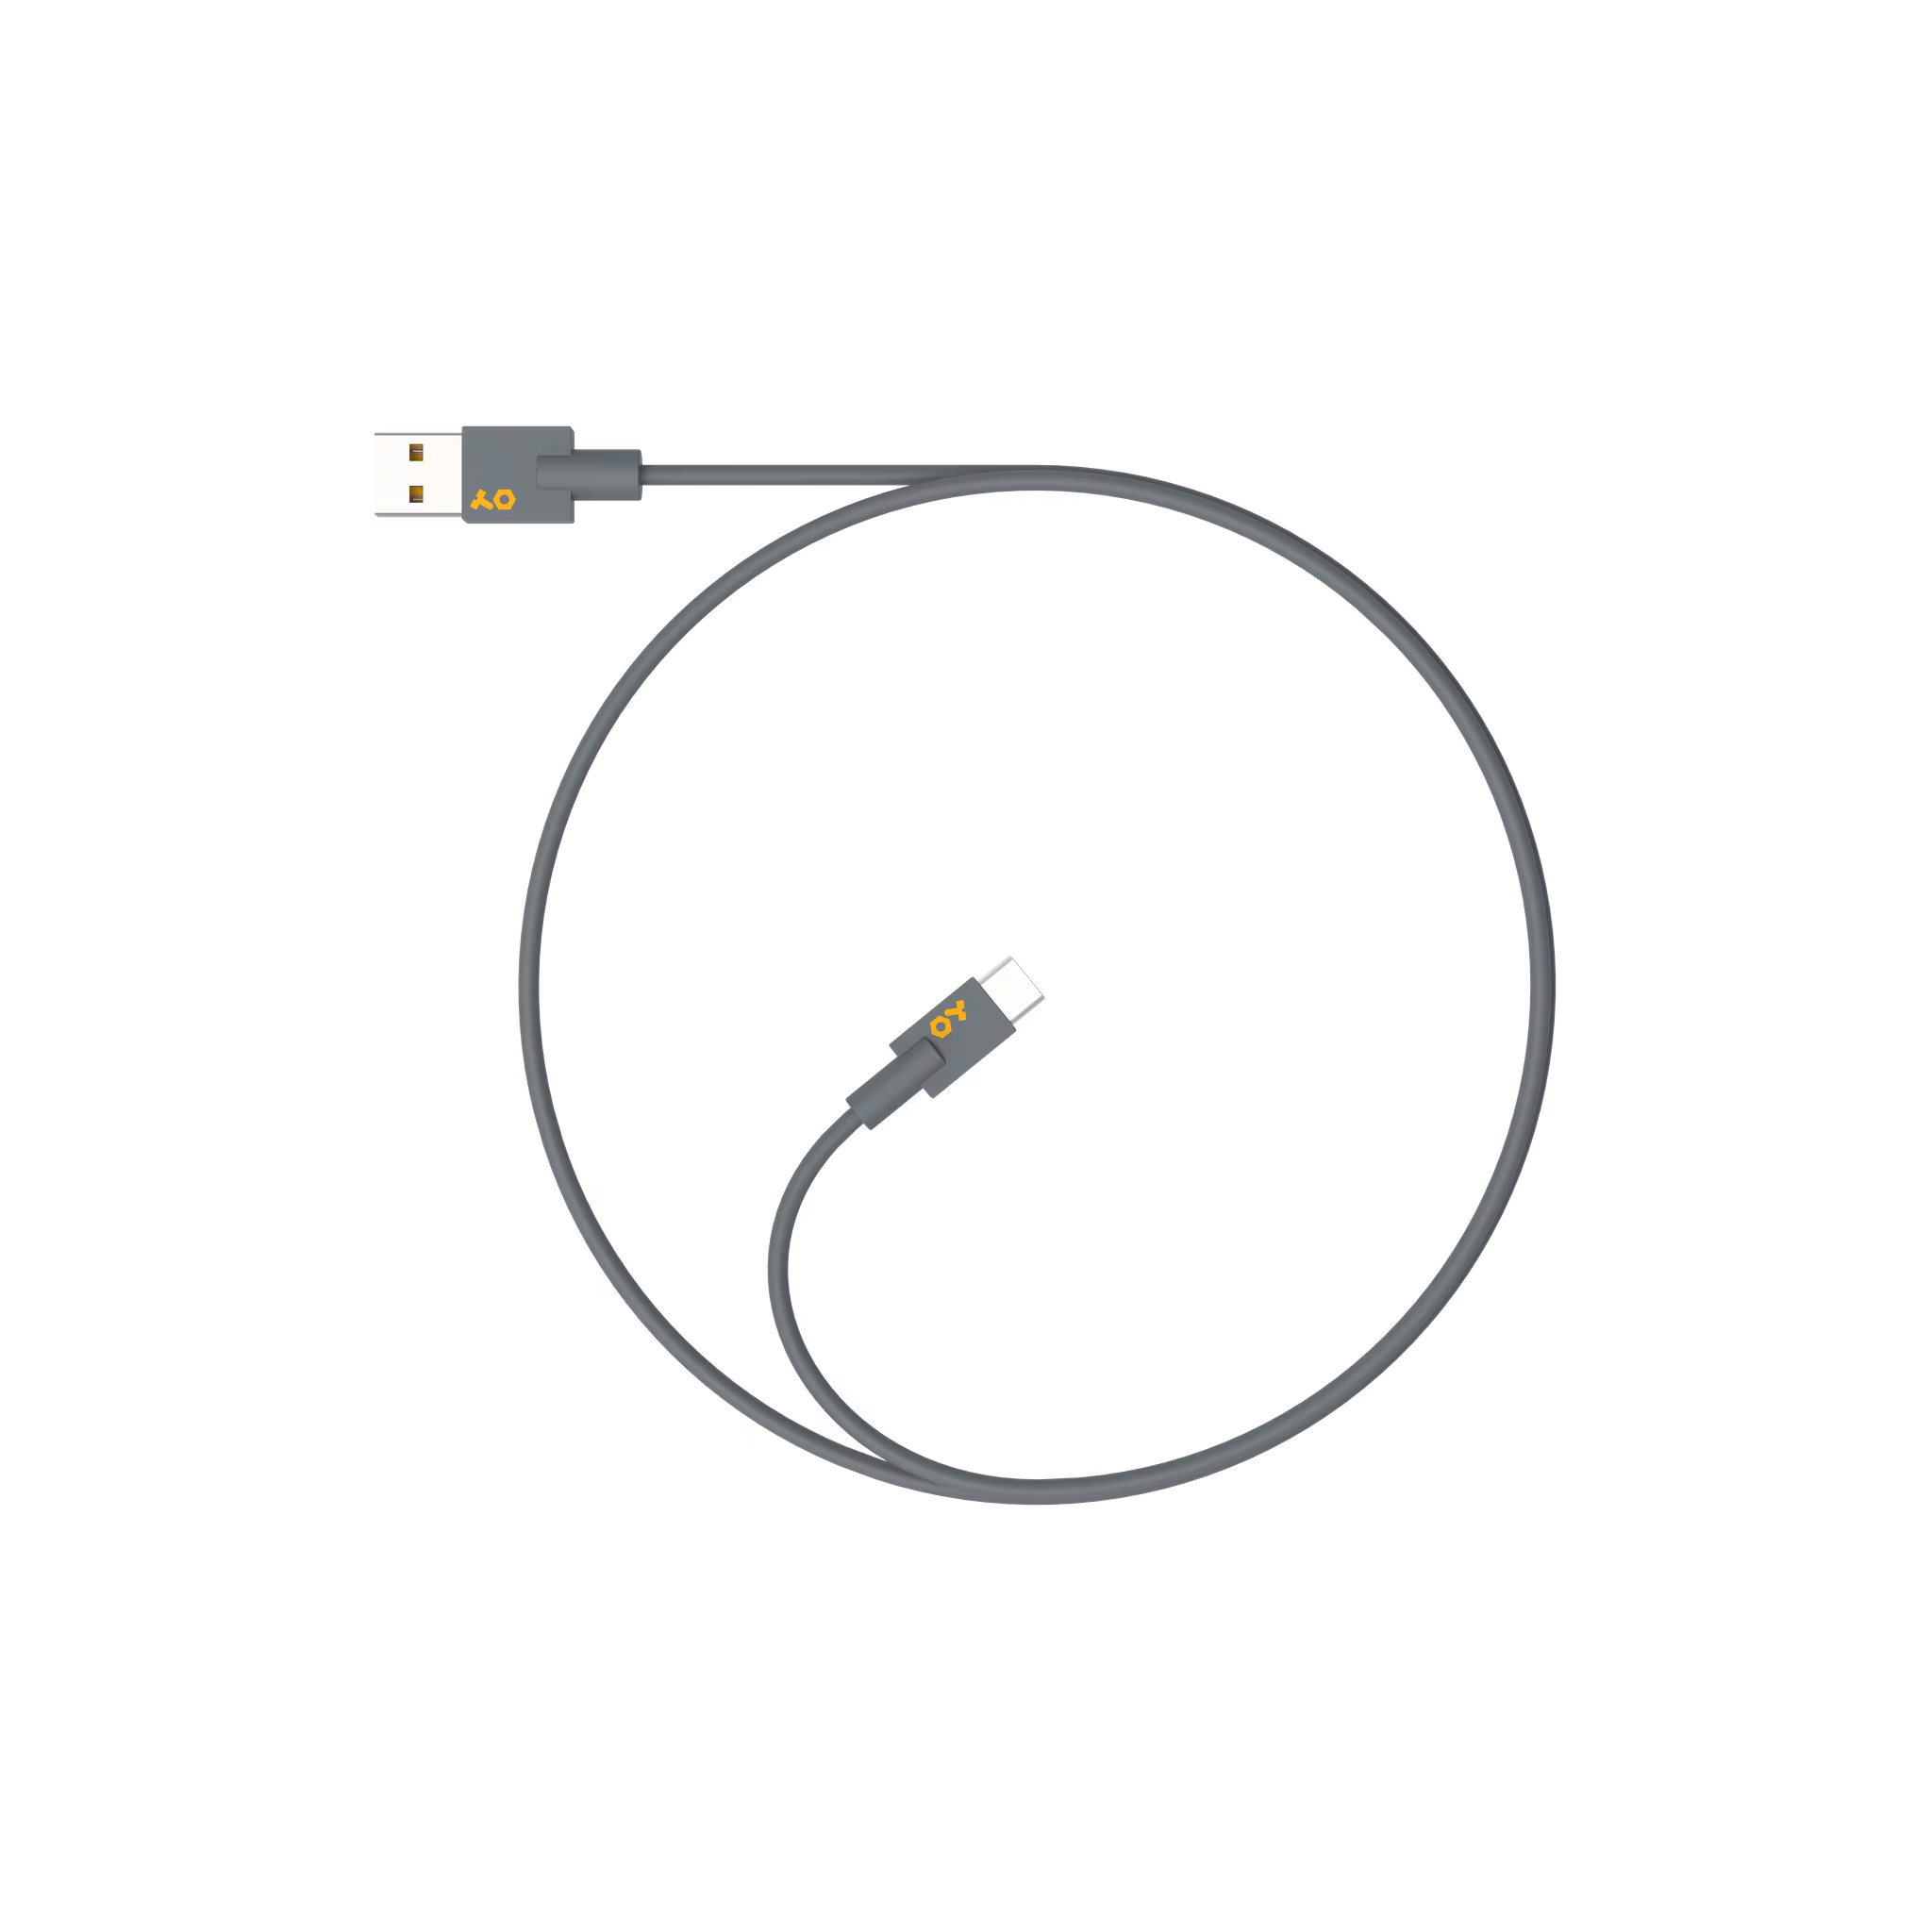 TE USB cable type C to type A 新品